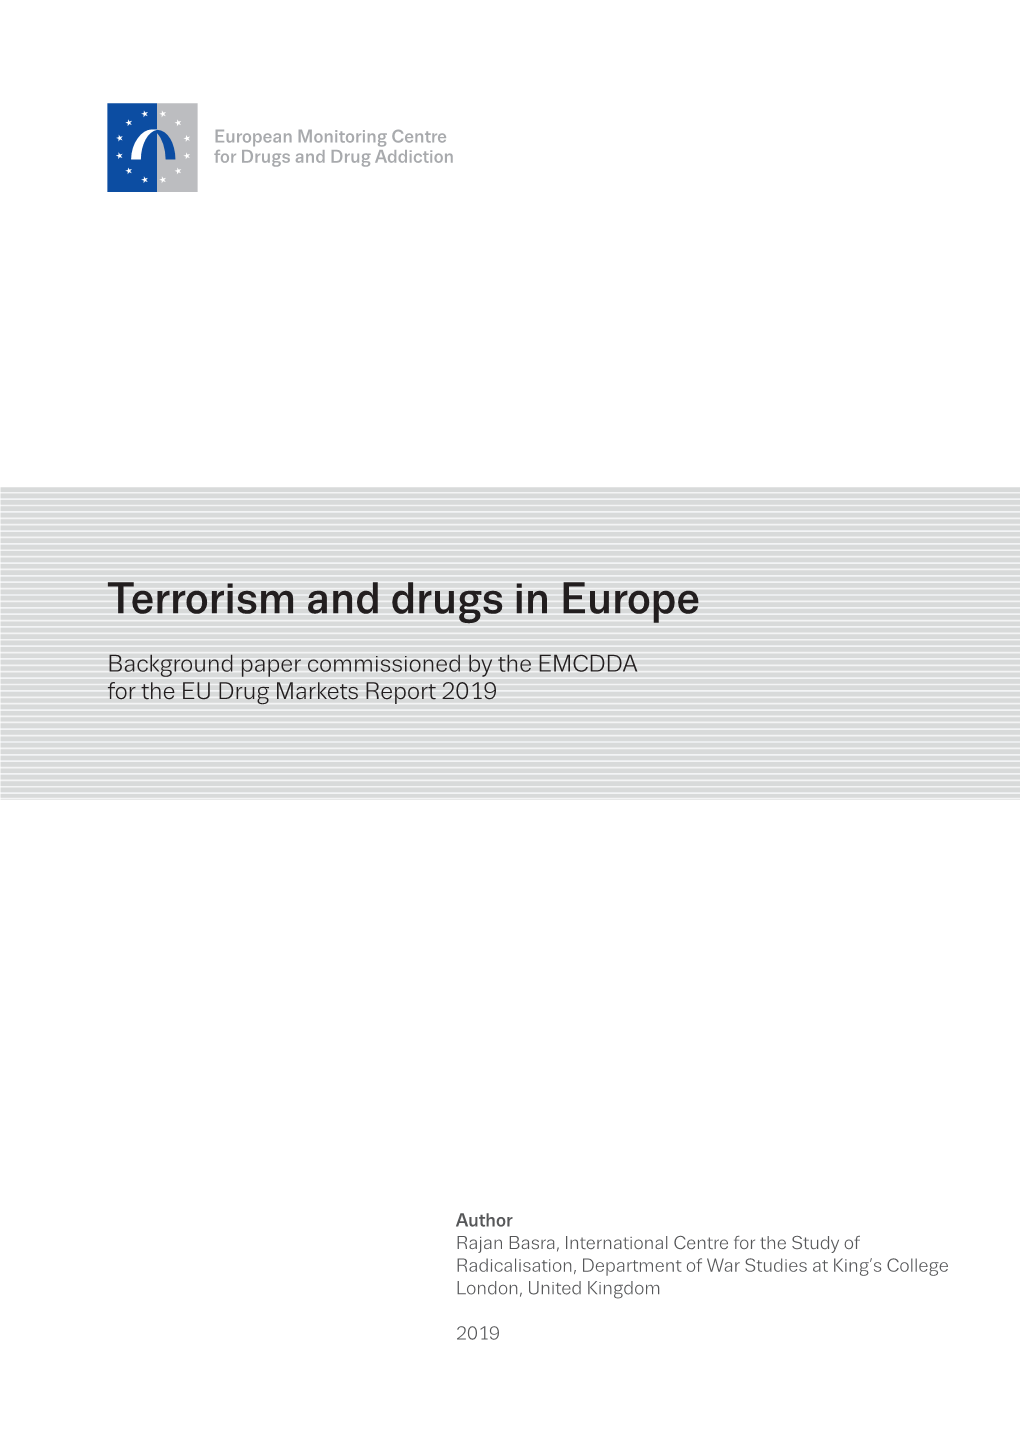 Terrorism and Drugs in Europe